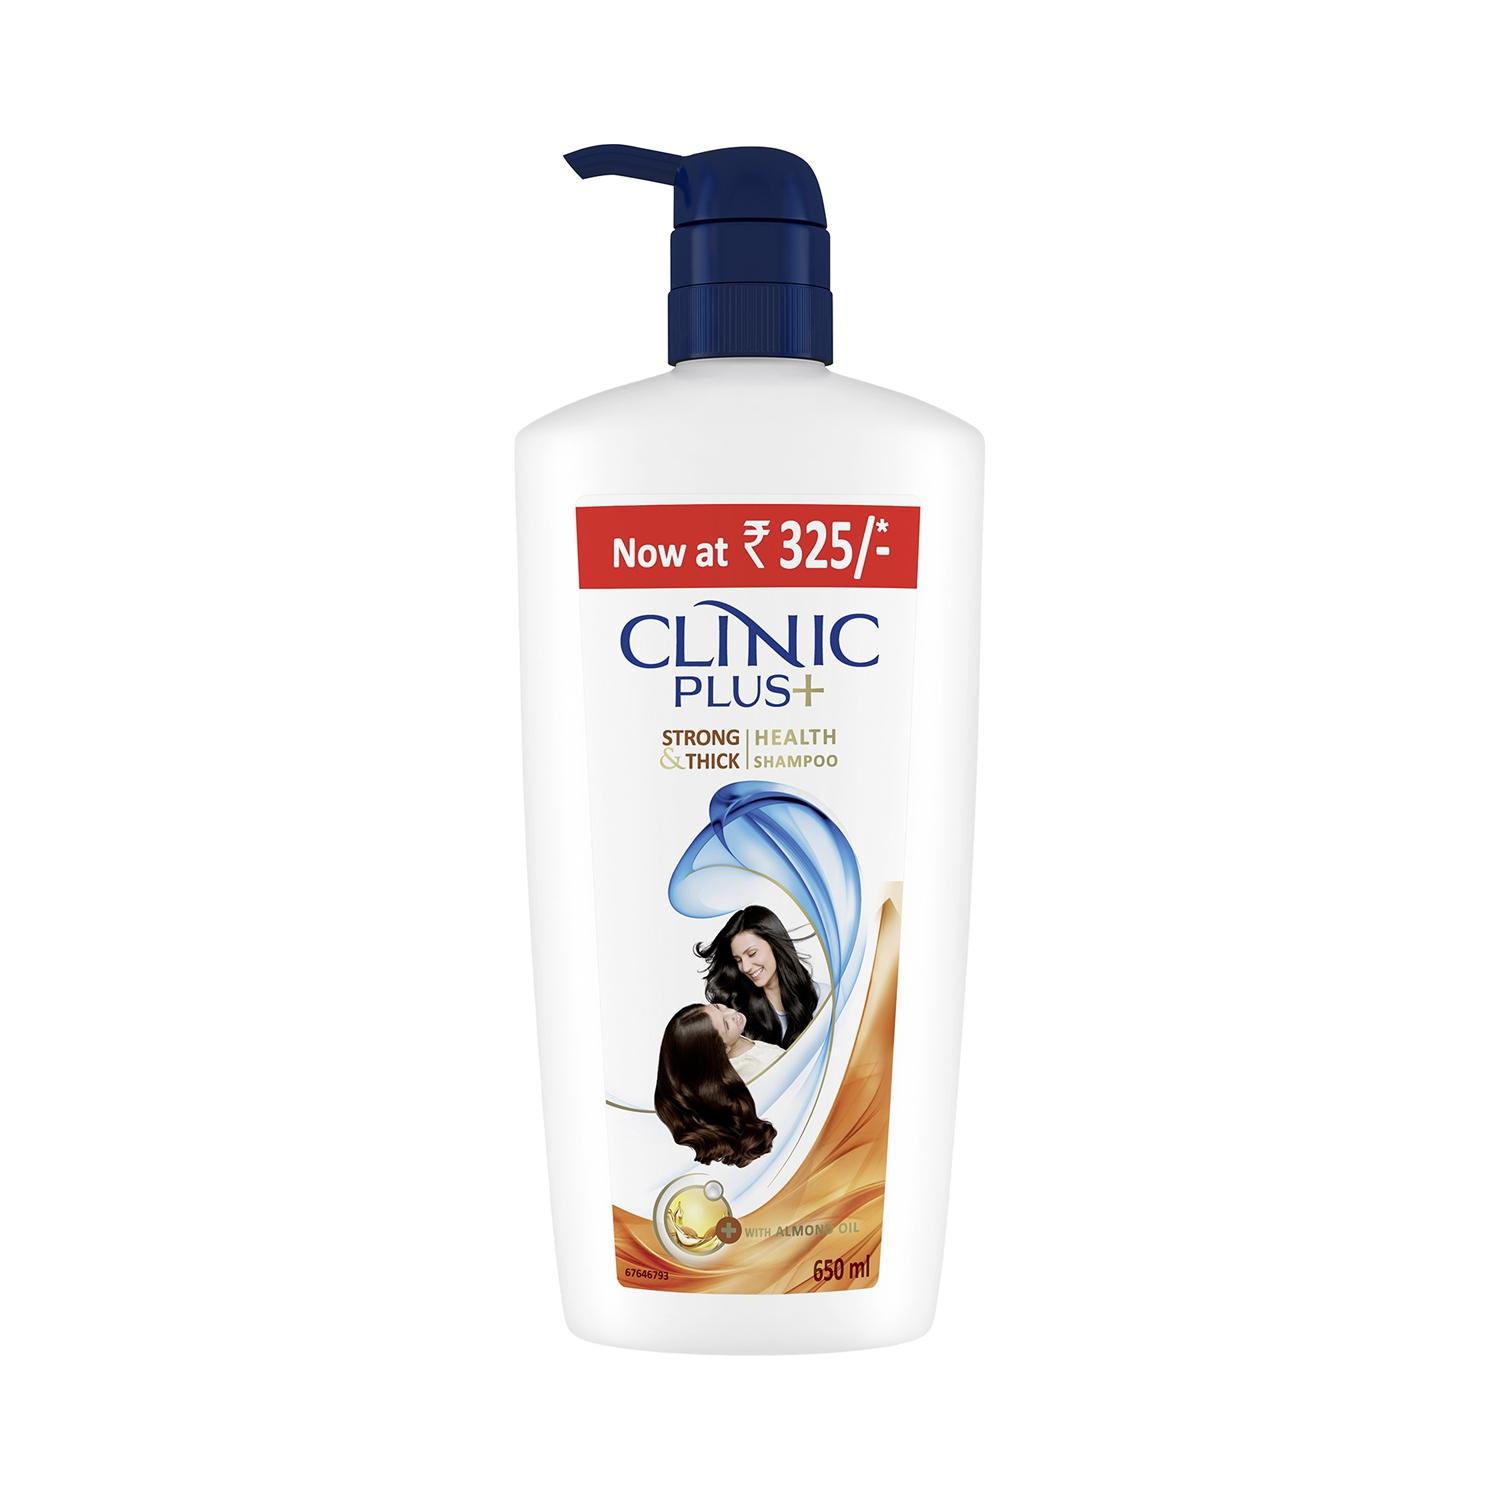 Clinic Plus Strong & Thick Shampoo (650ml)